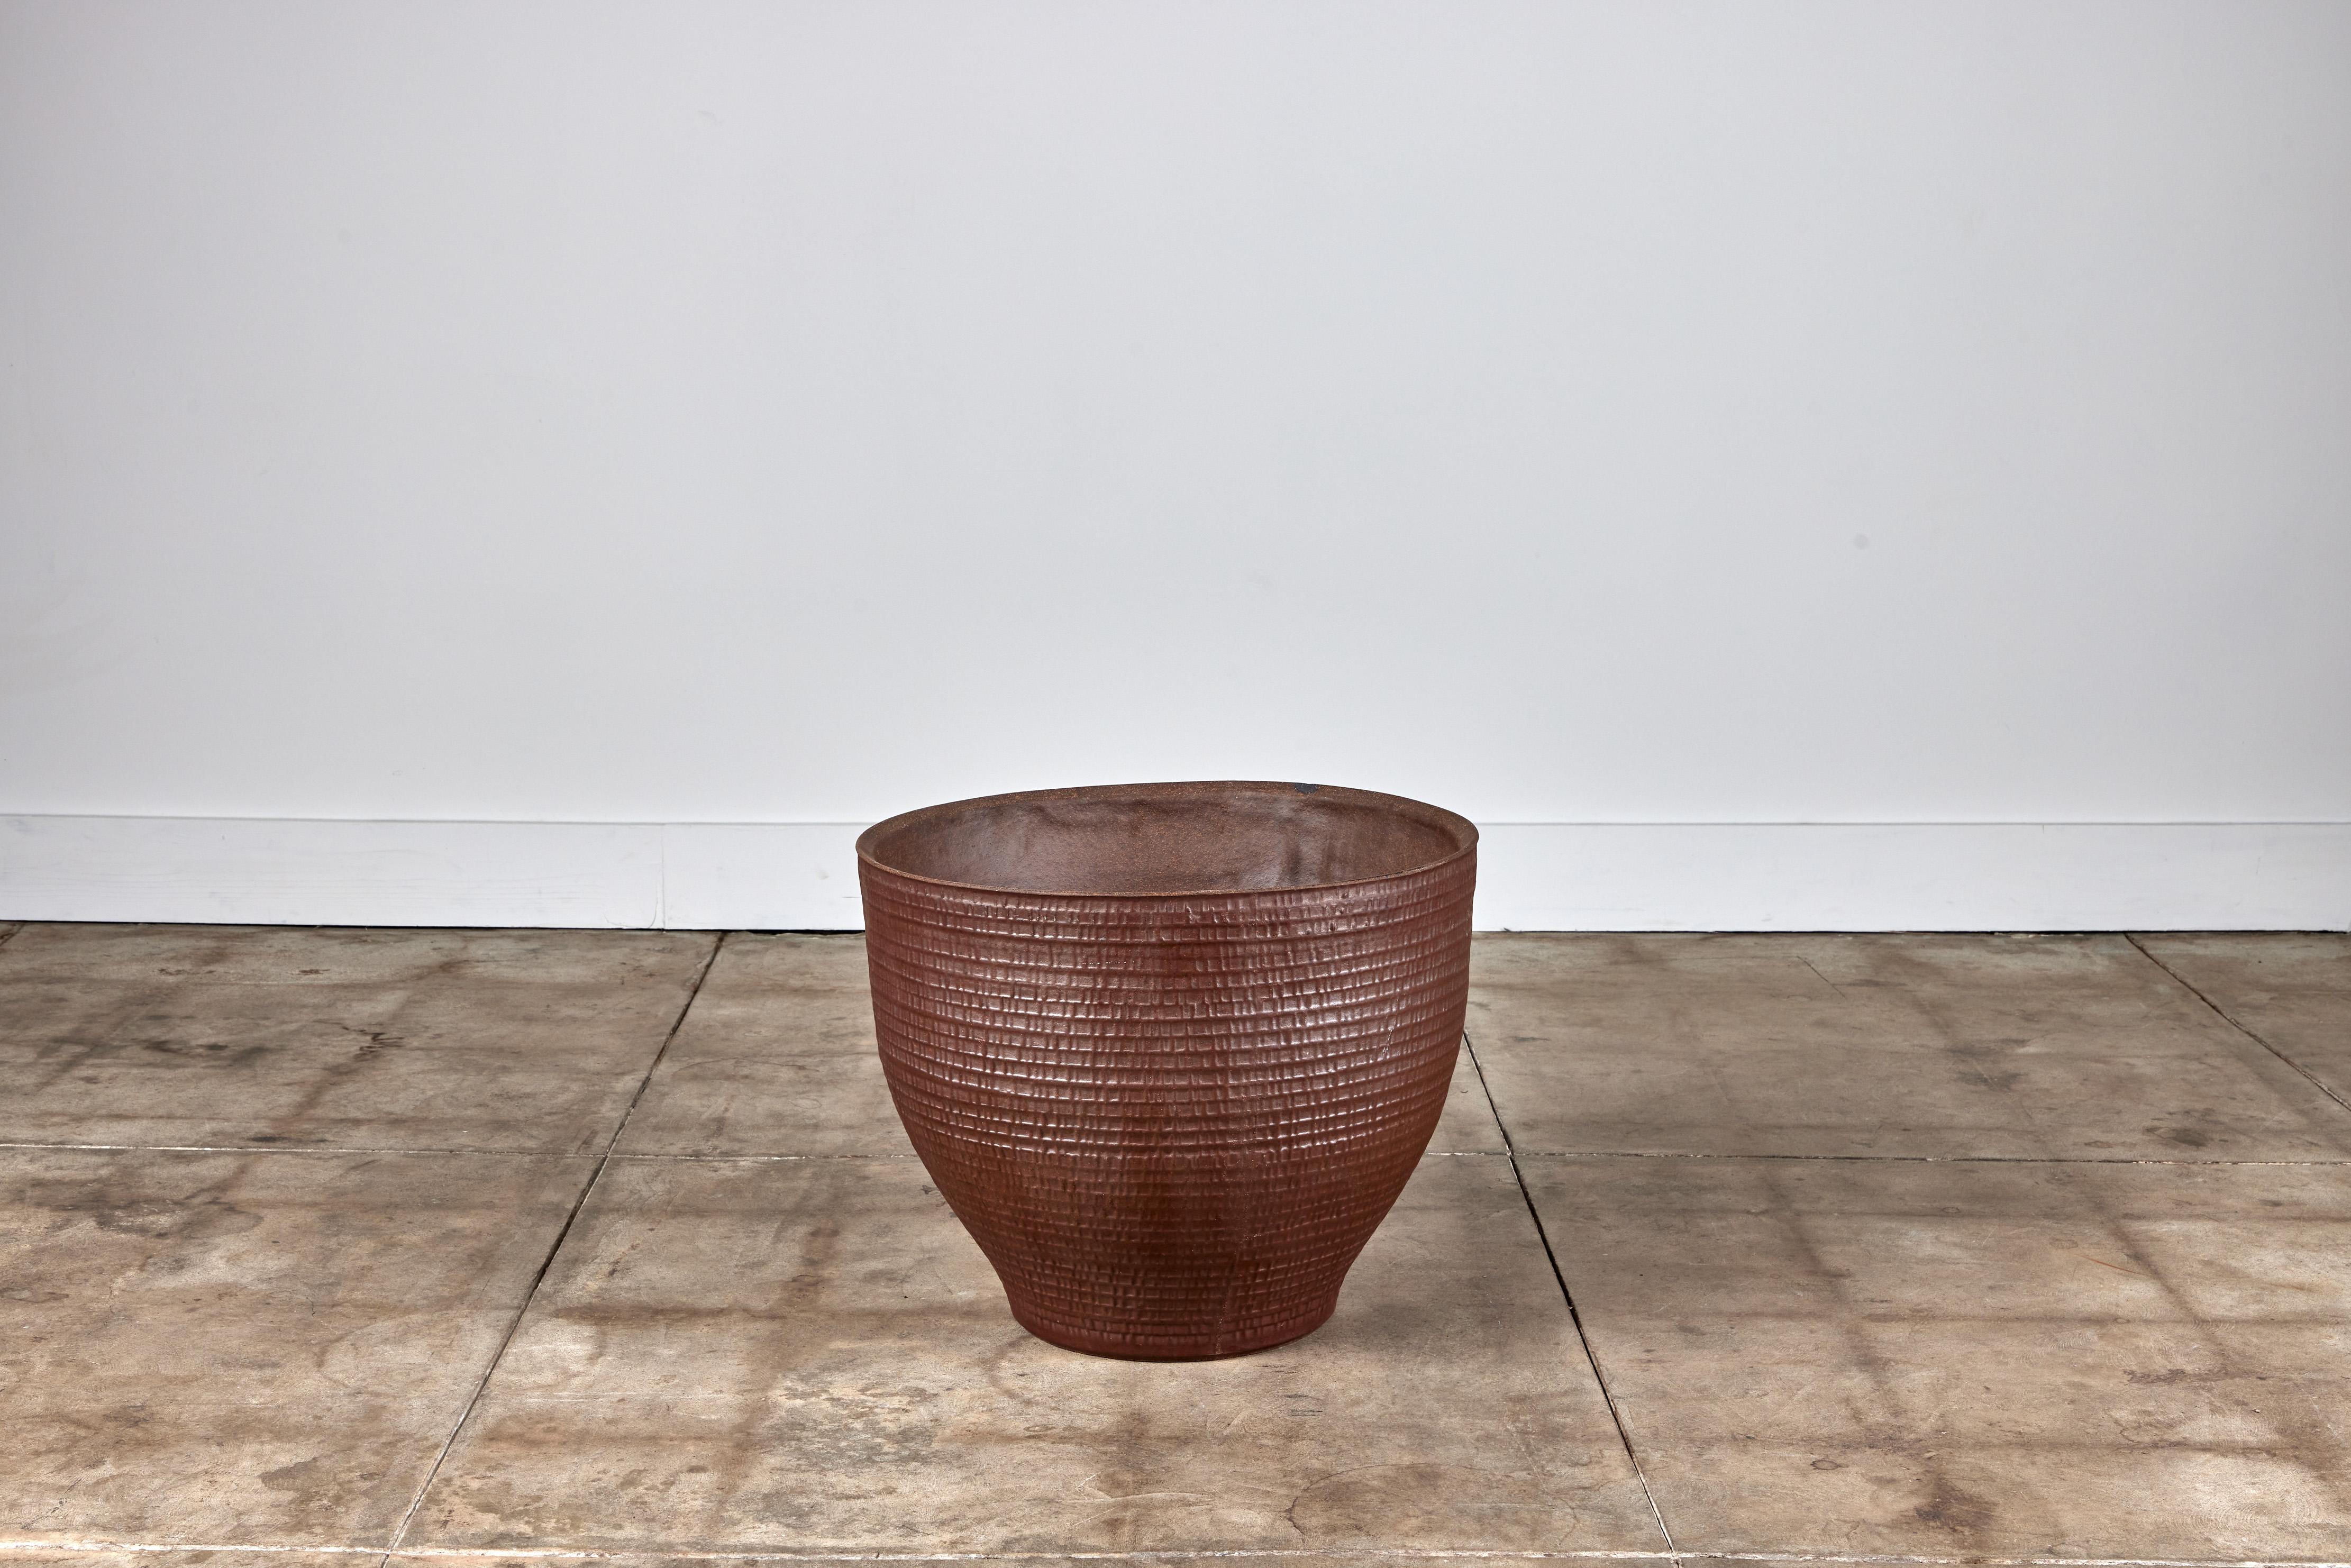 David Cressey Pro/Artisan collection Planter for Architectural Pottery. This stoneware planter has a soft speckled unglazed interior and a brown glazed exterior with the iconic 